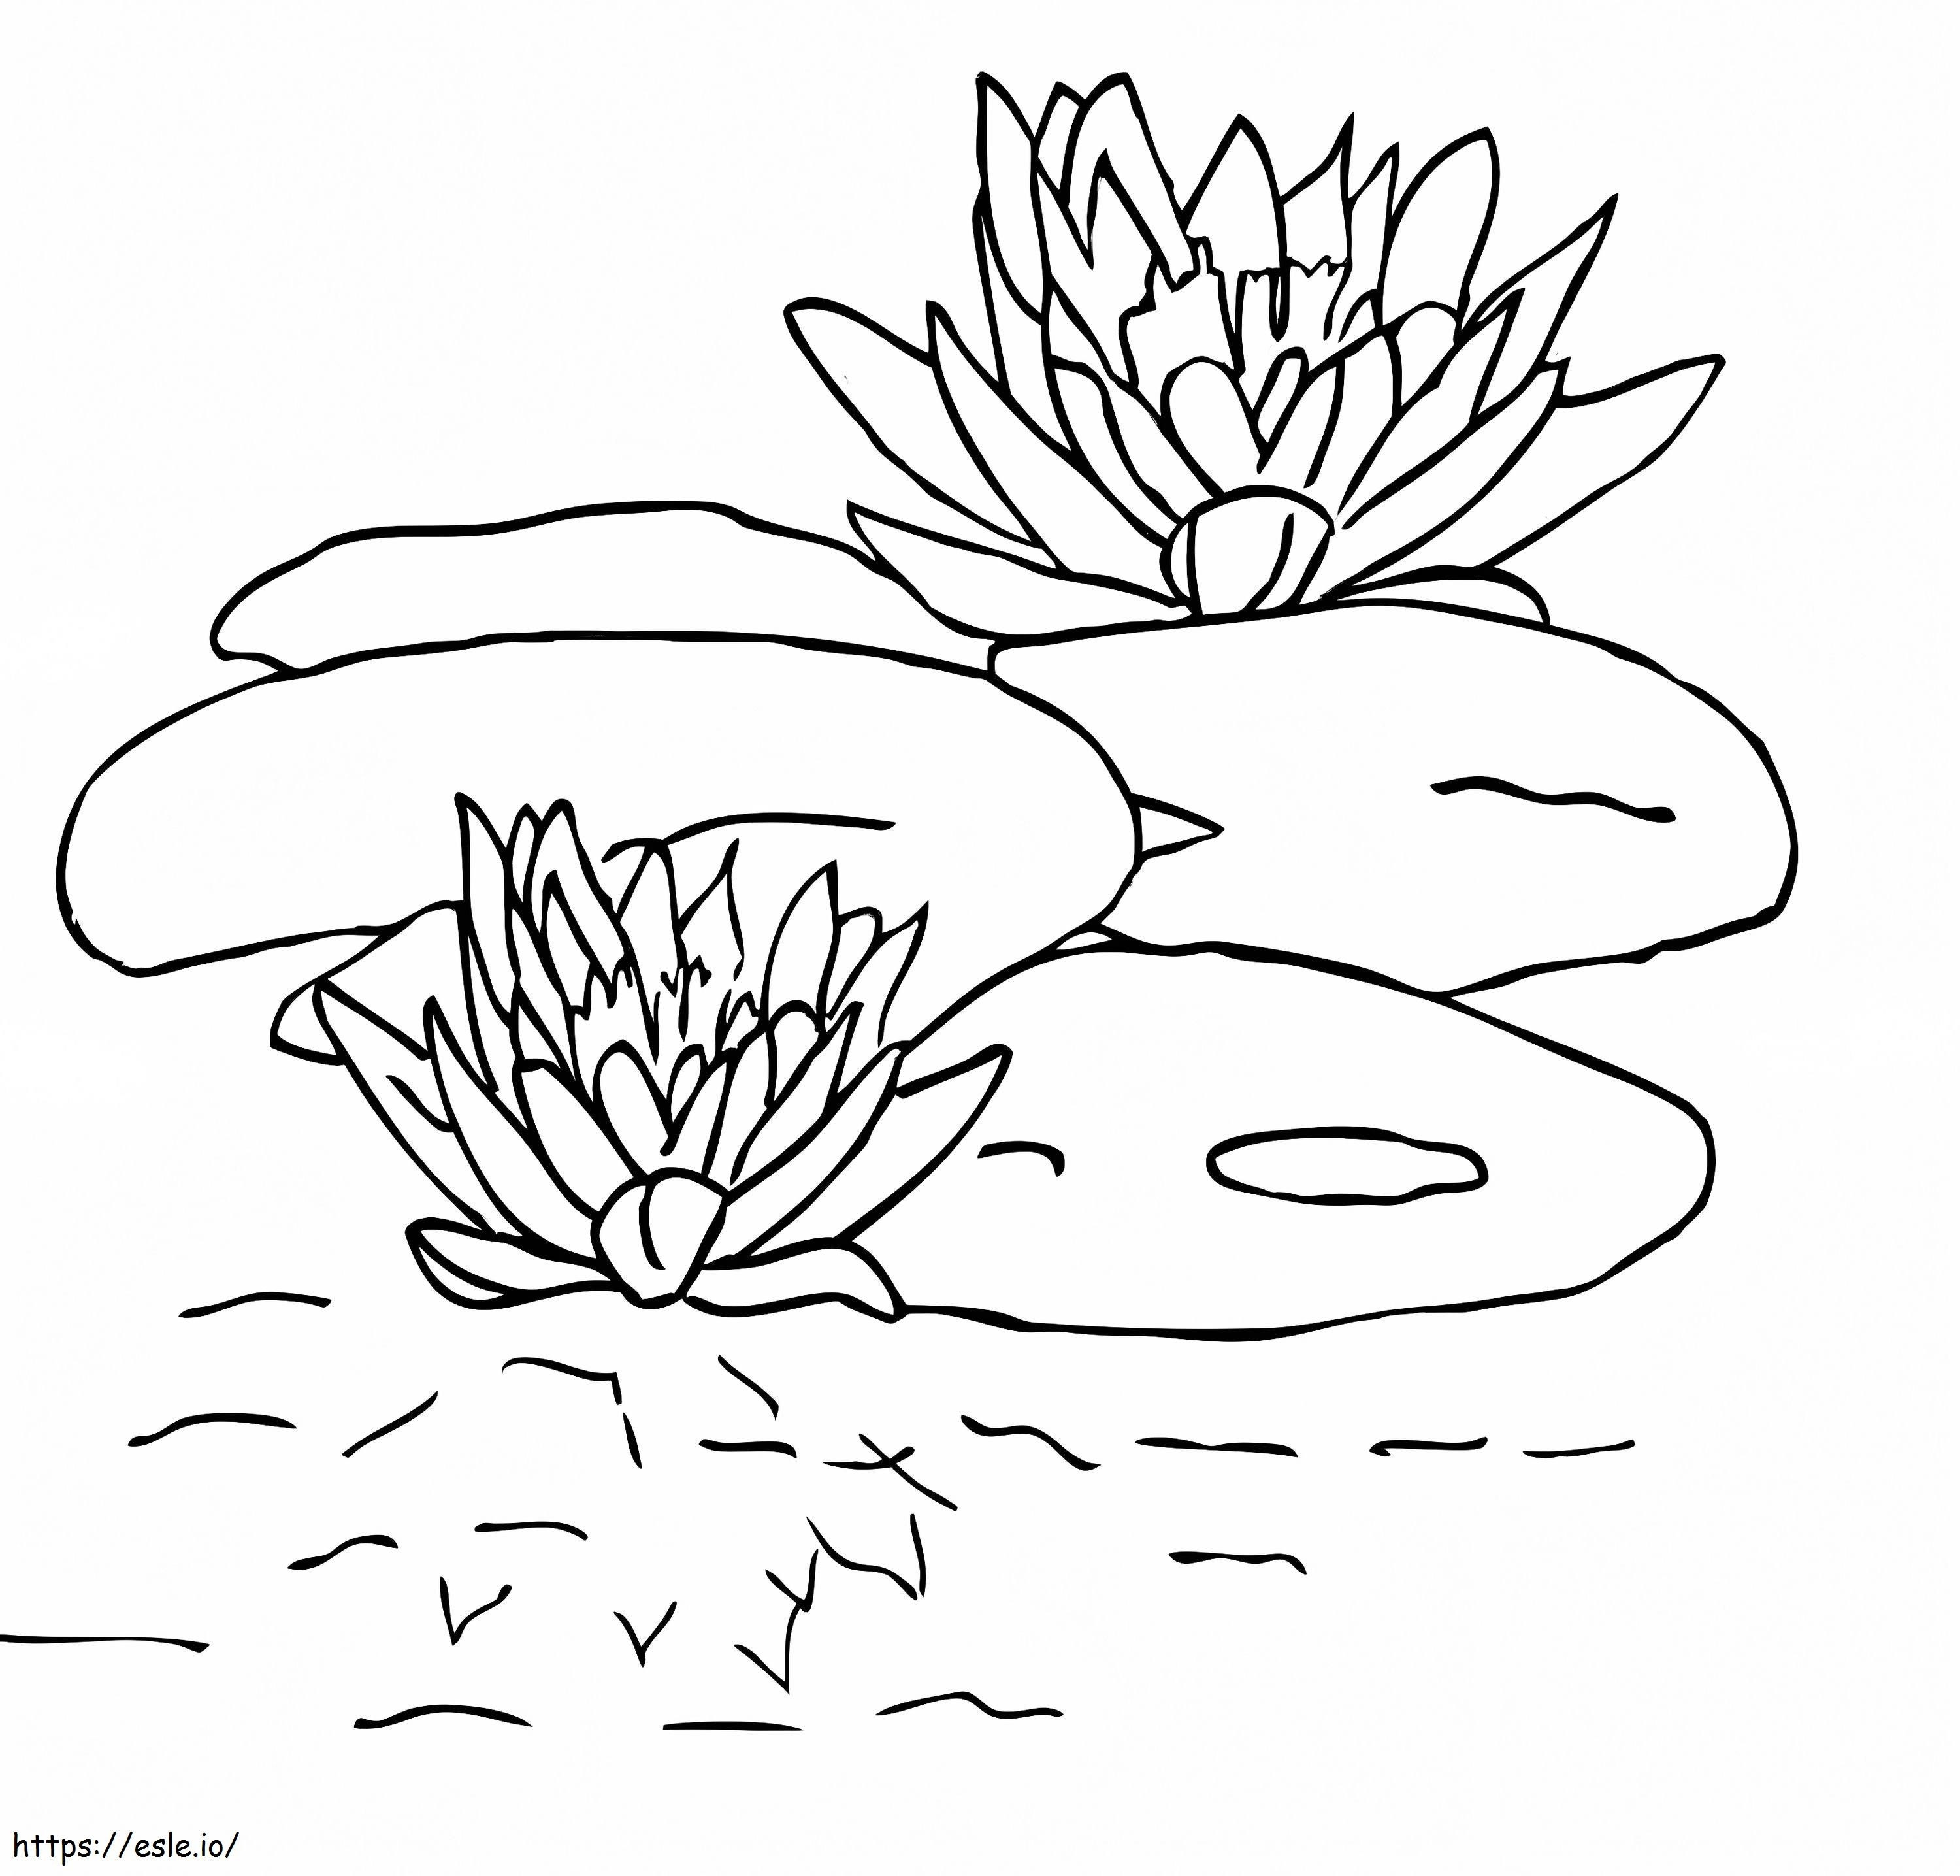 Lily Pad 2 coloring page